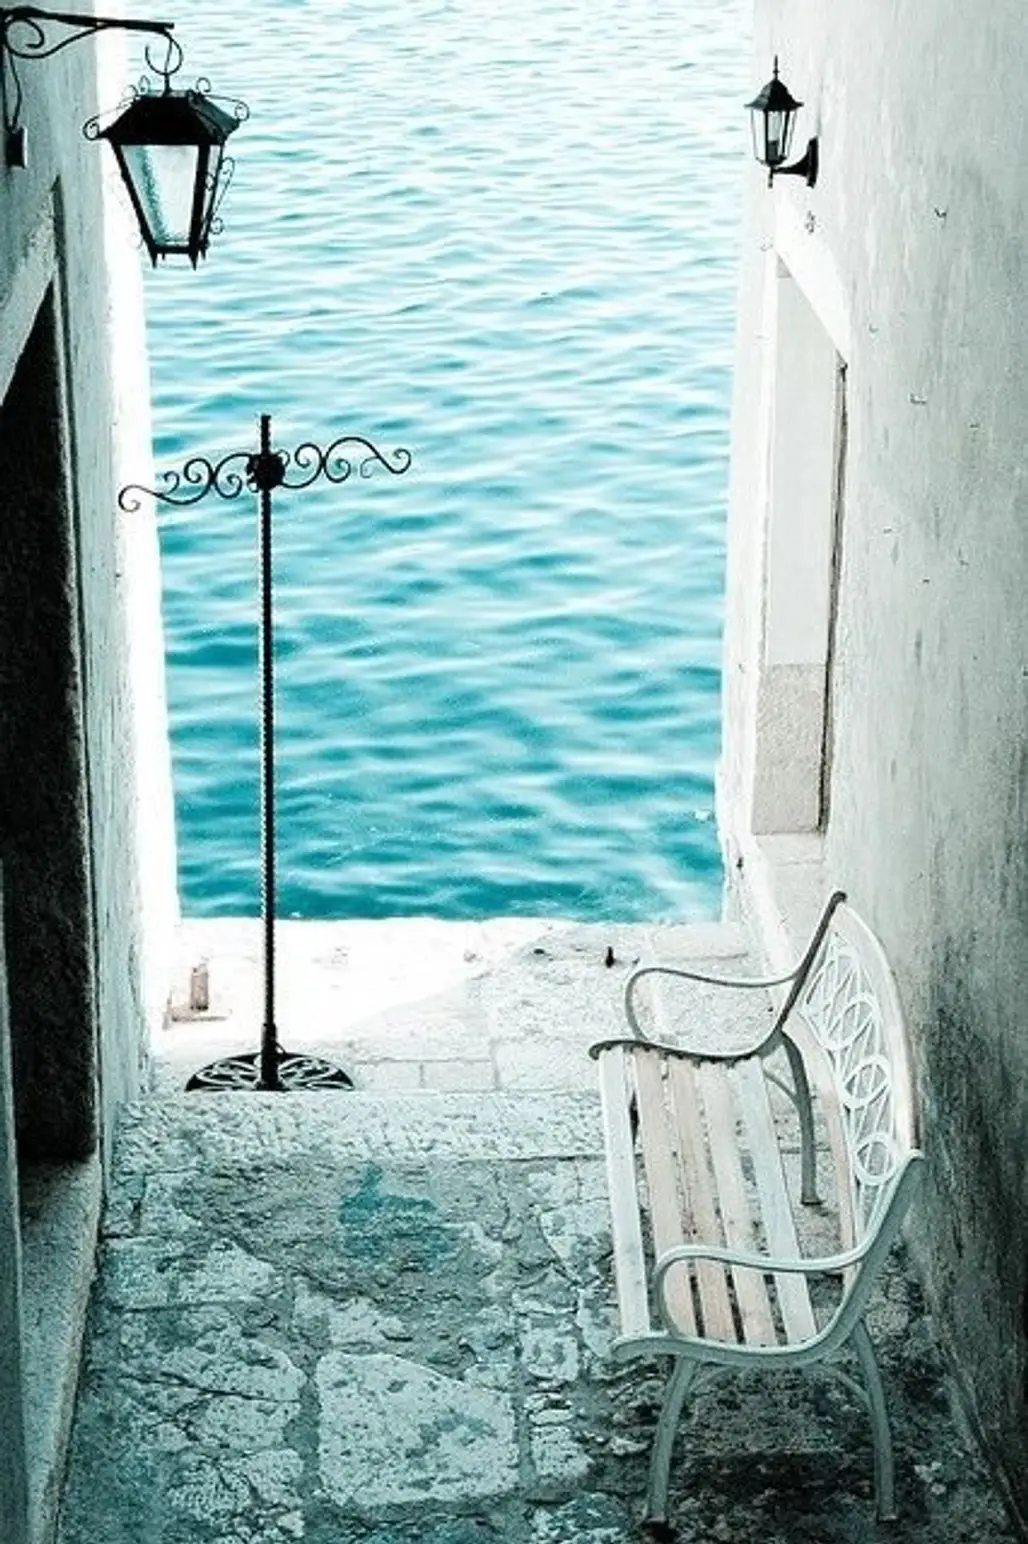 Stairway to the Sea